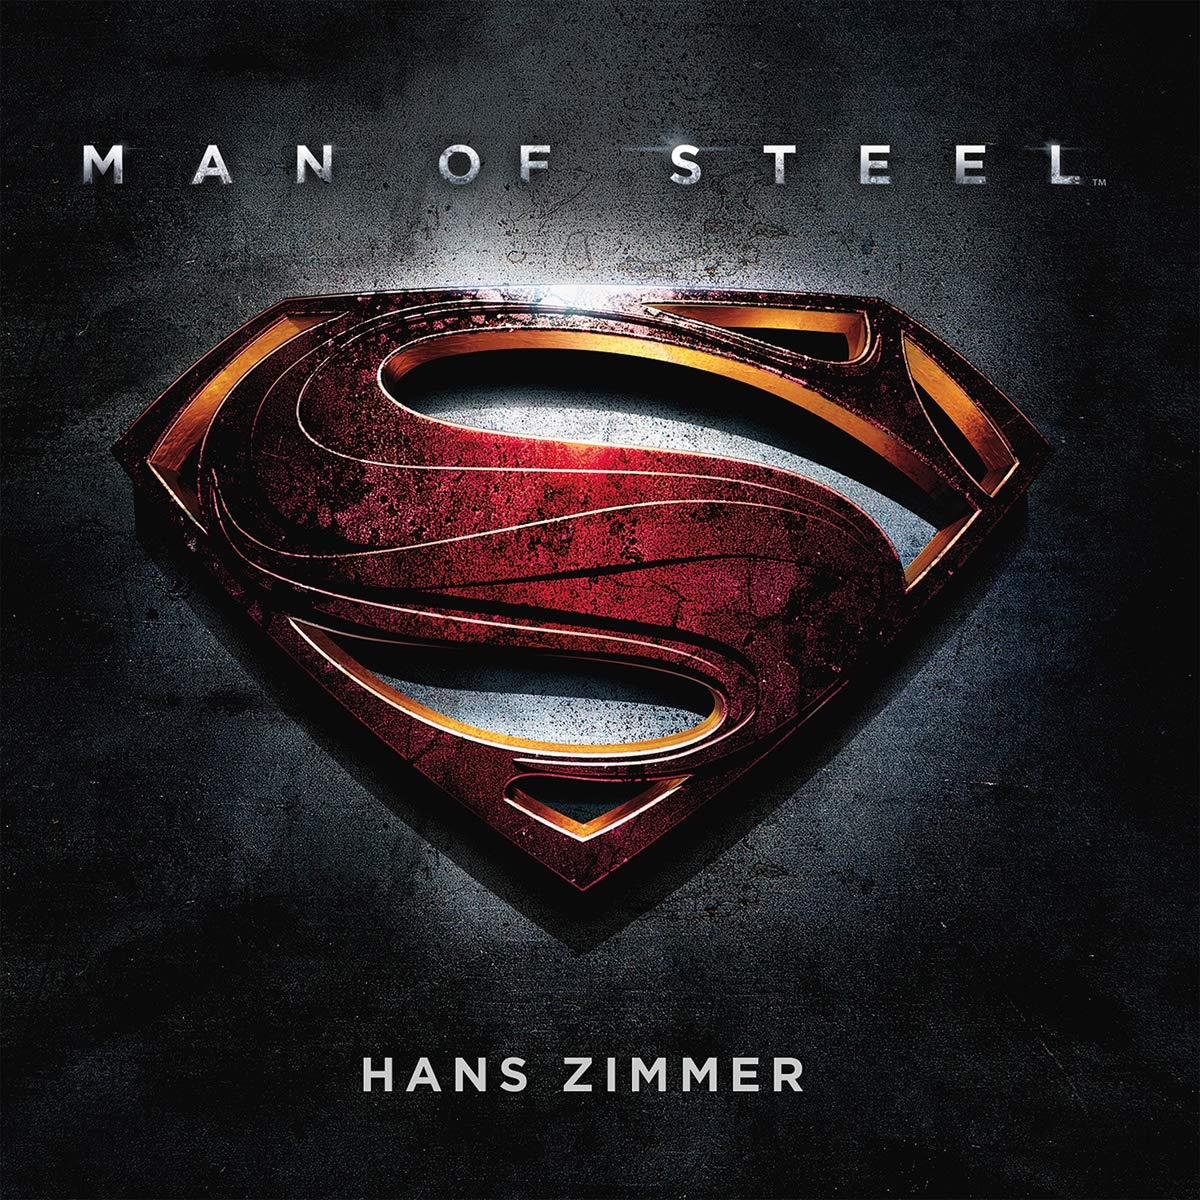 Man of Steel: Original Motion Picture Soundtrack (Limited Edition Numbered 180g Translucent Red Vinyl)